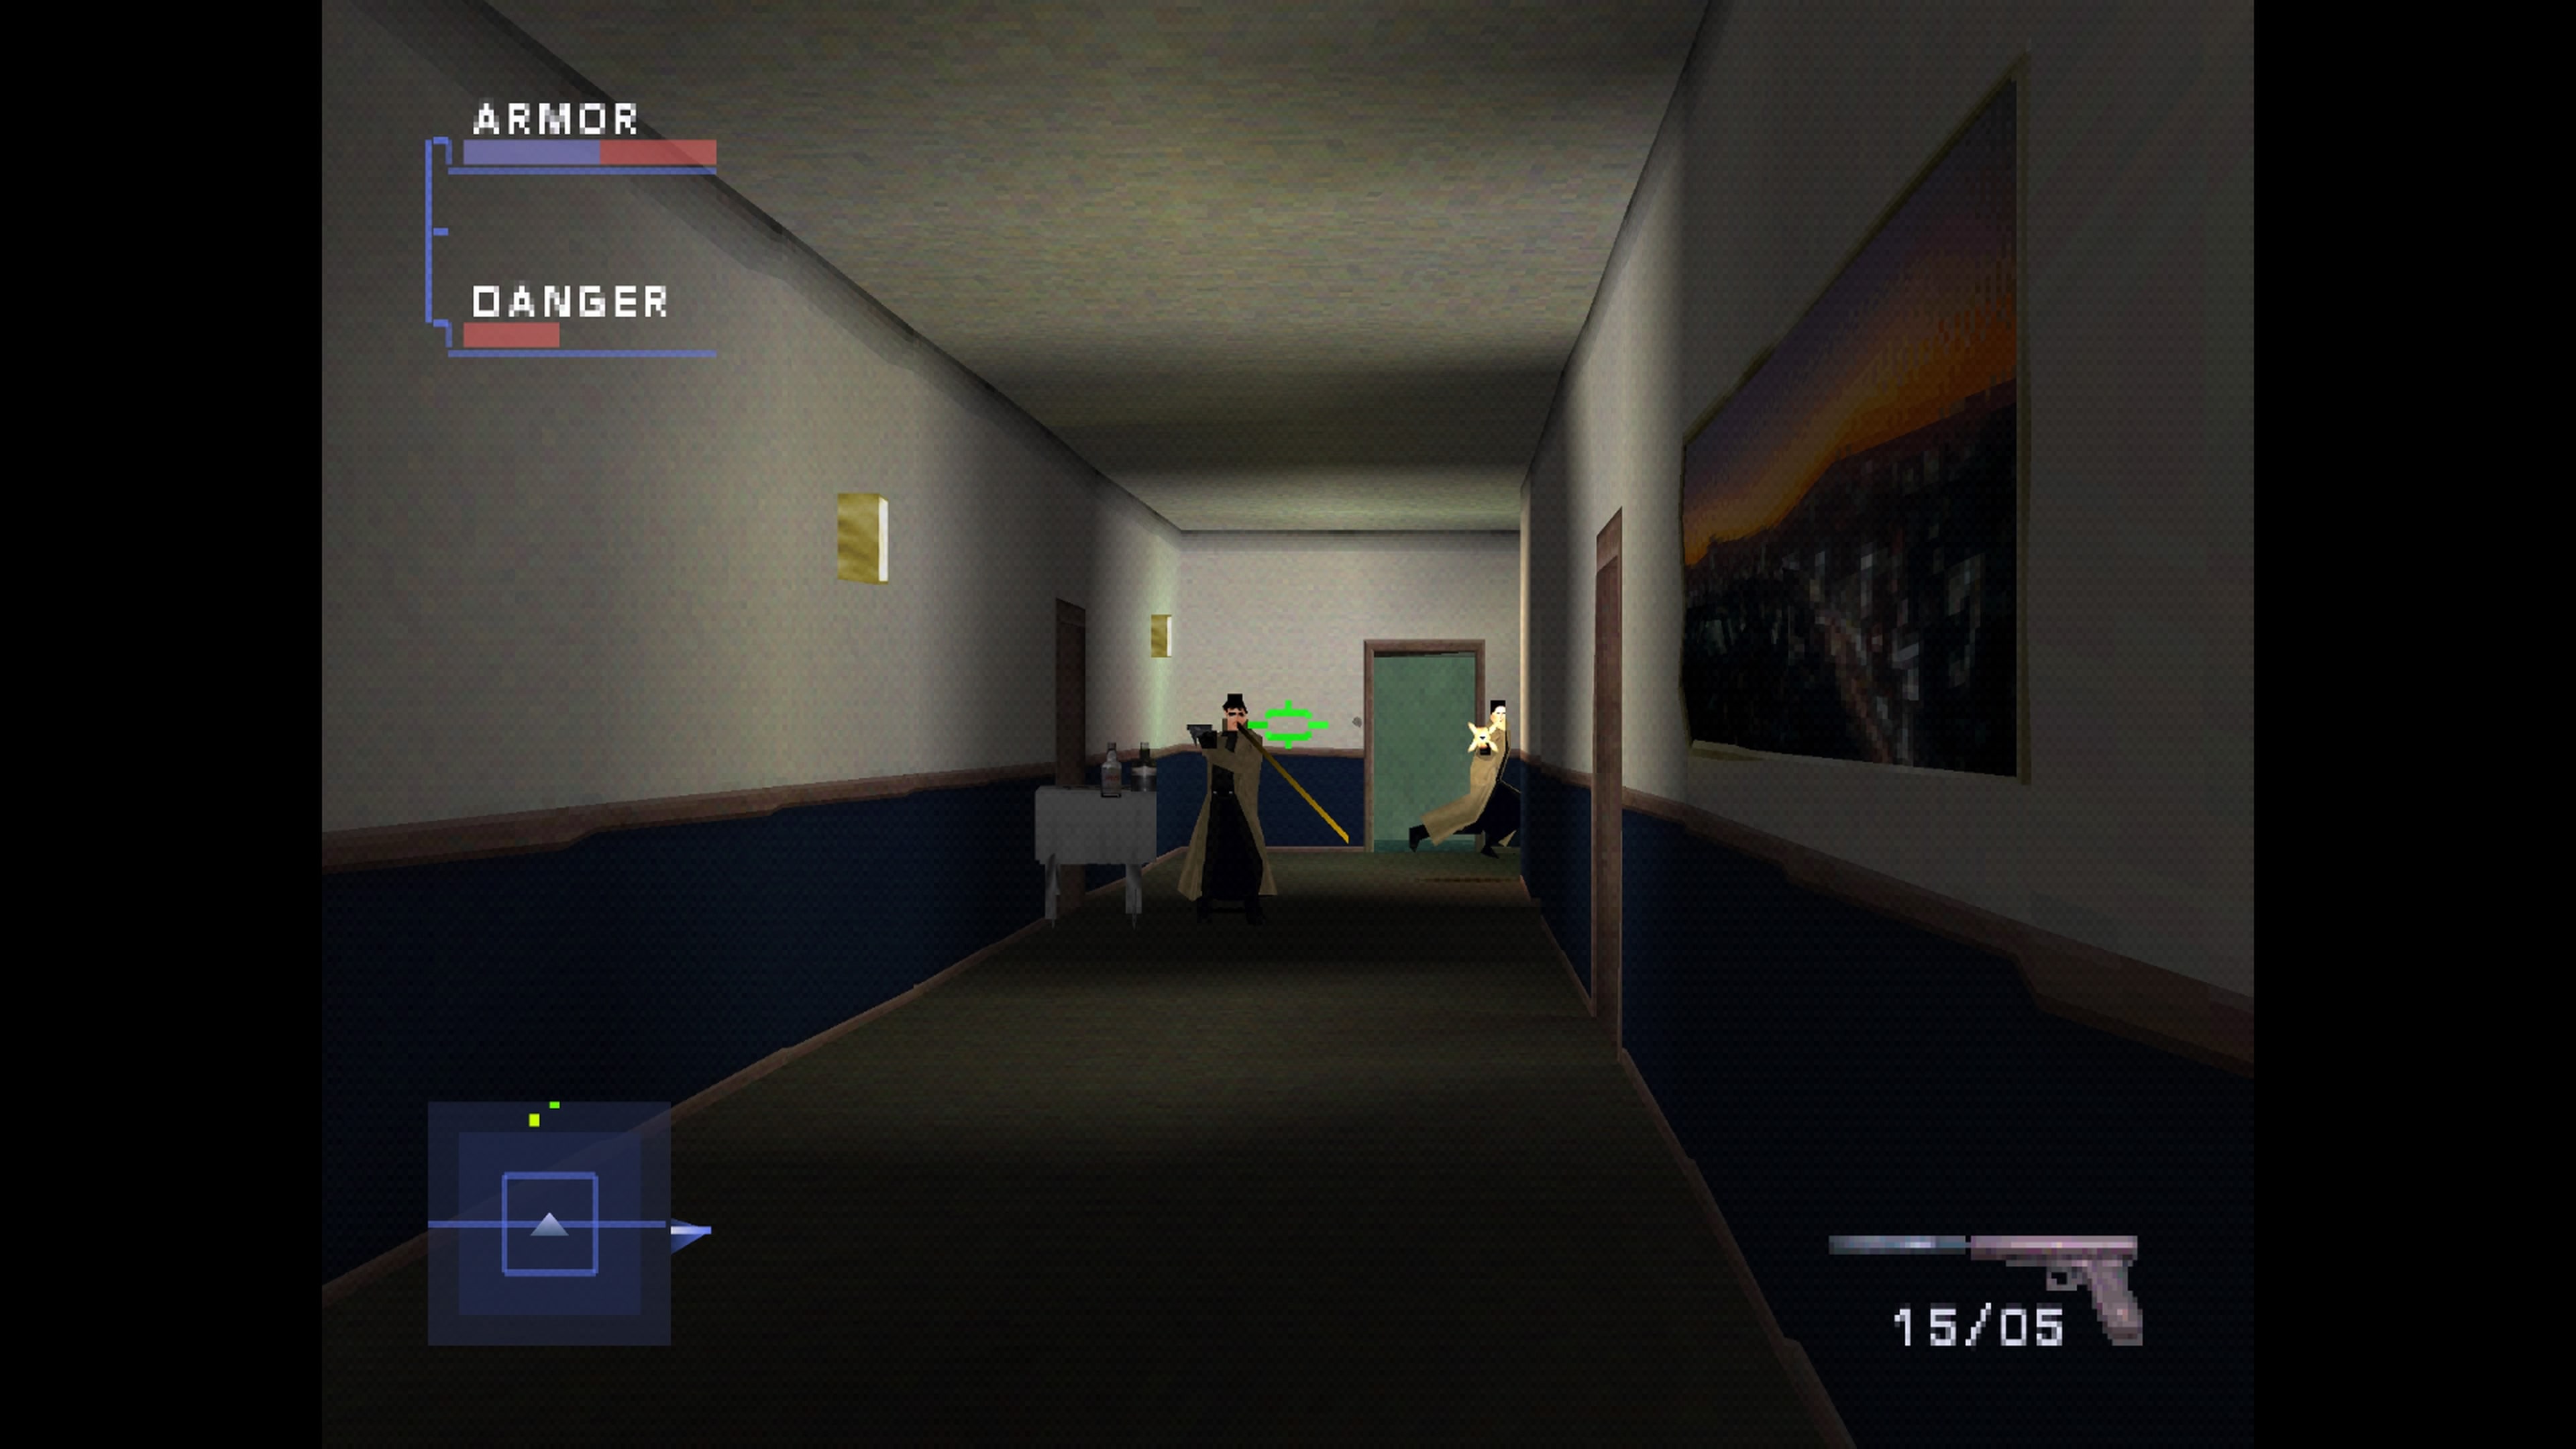 Syphon Filter 3 (PS1) - The Cover Project